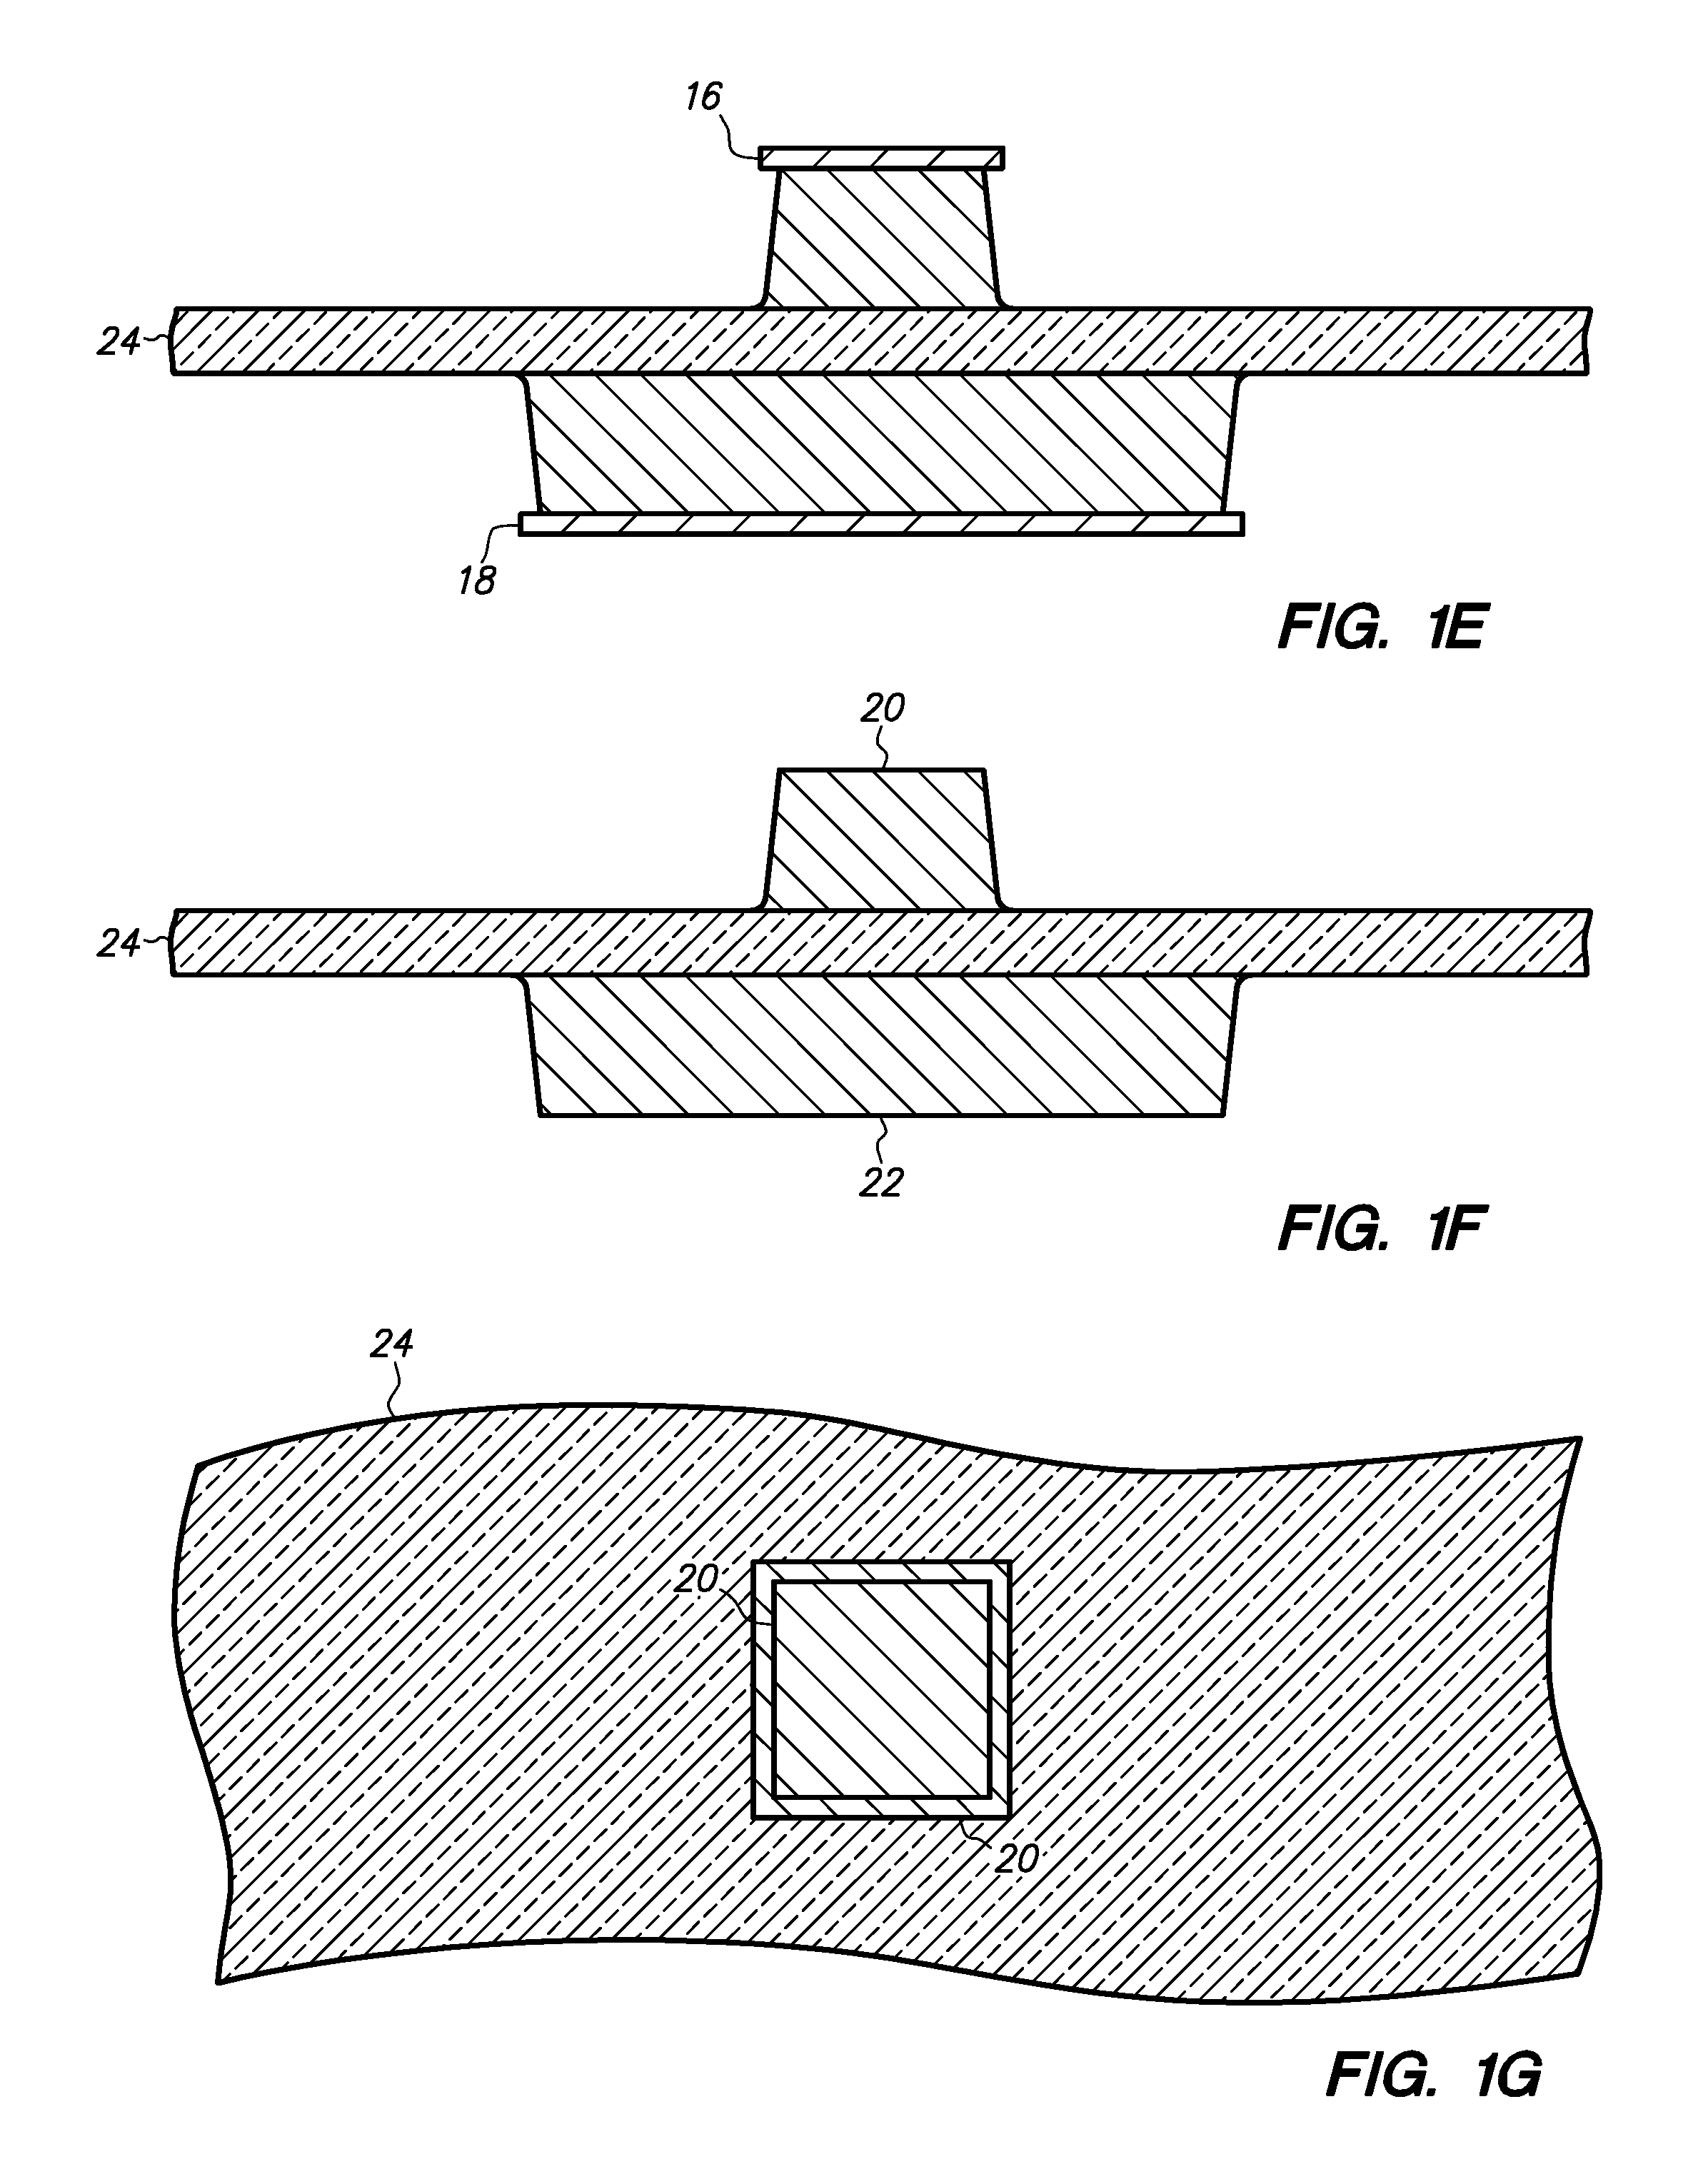 Method of making a semiconductor chip assembly with a post/dielectric/post heat spreader